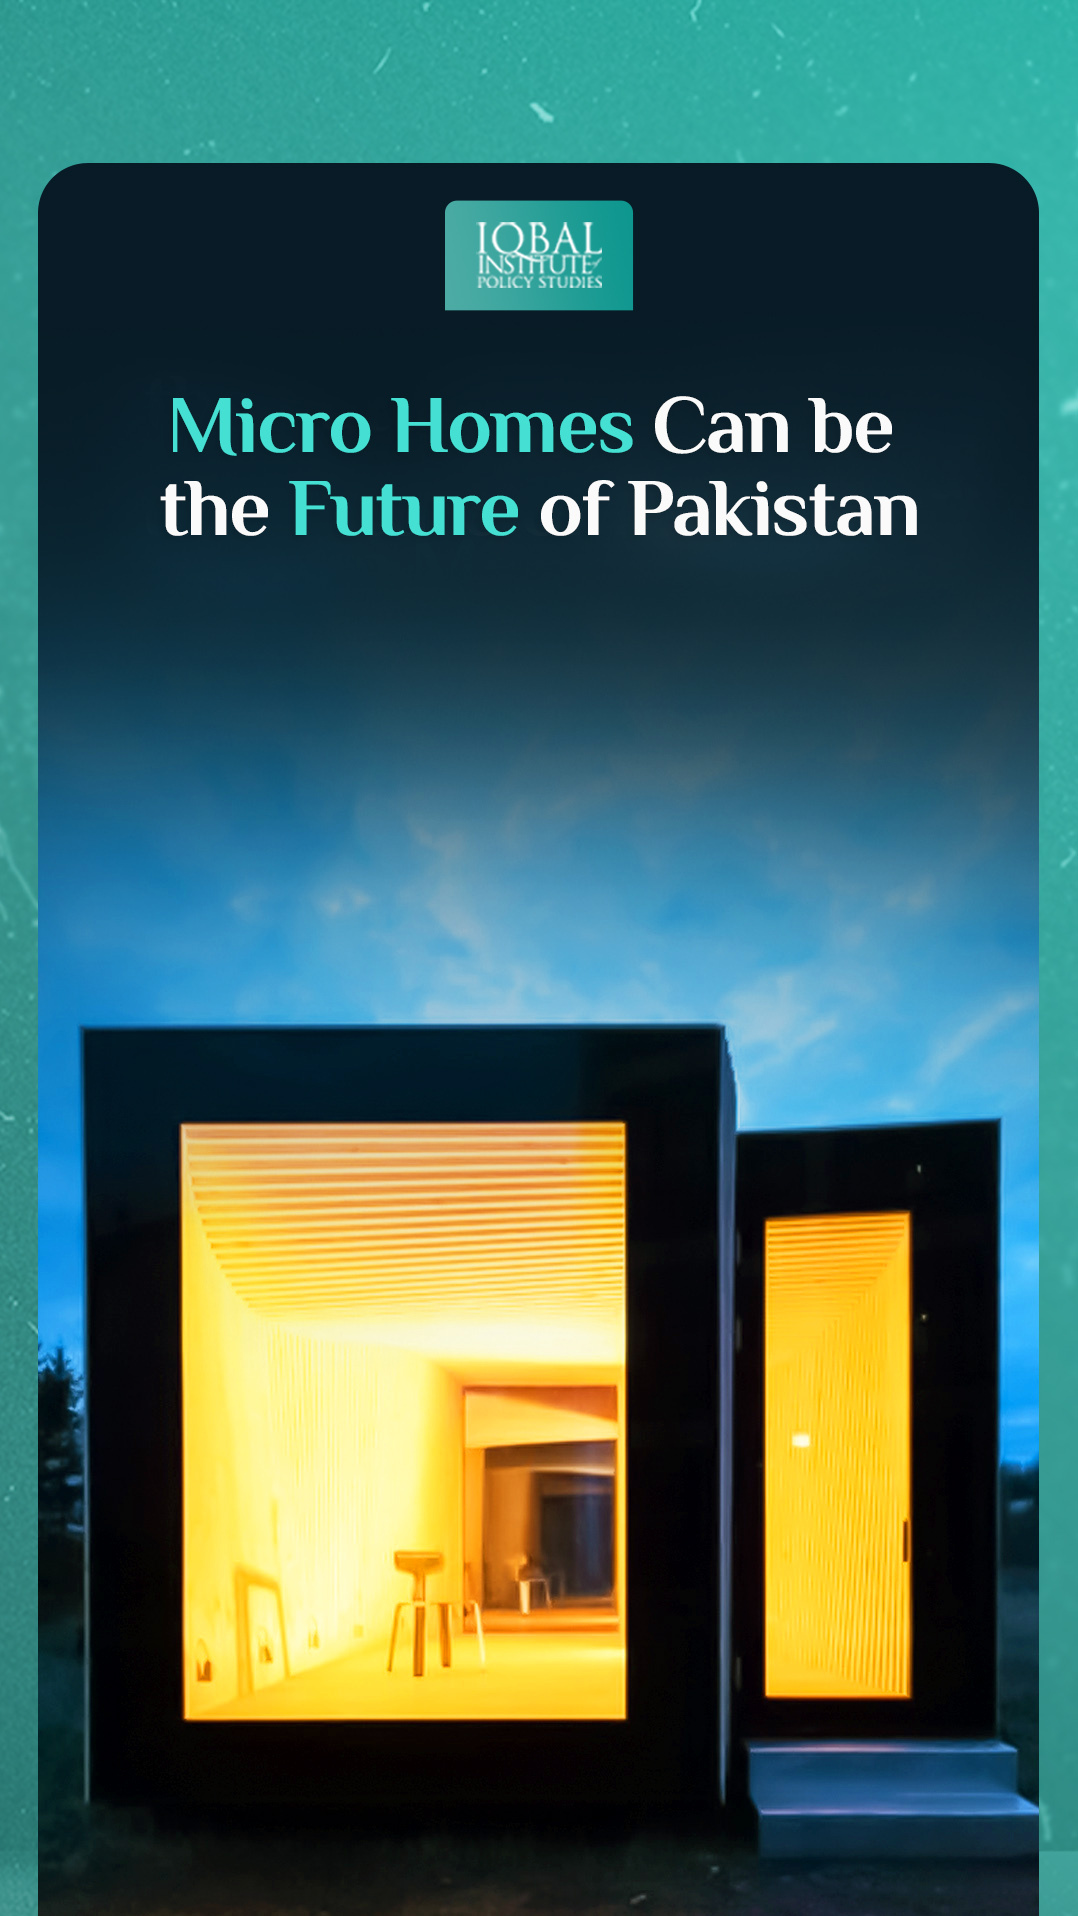 Micro Homes Can be the Future of Pakistan